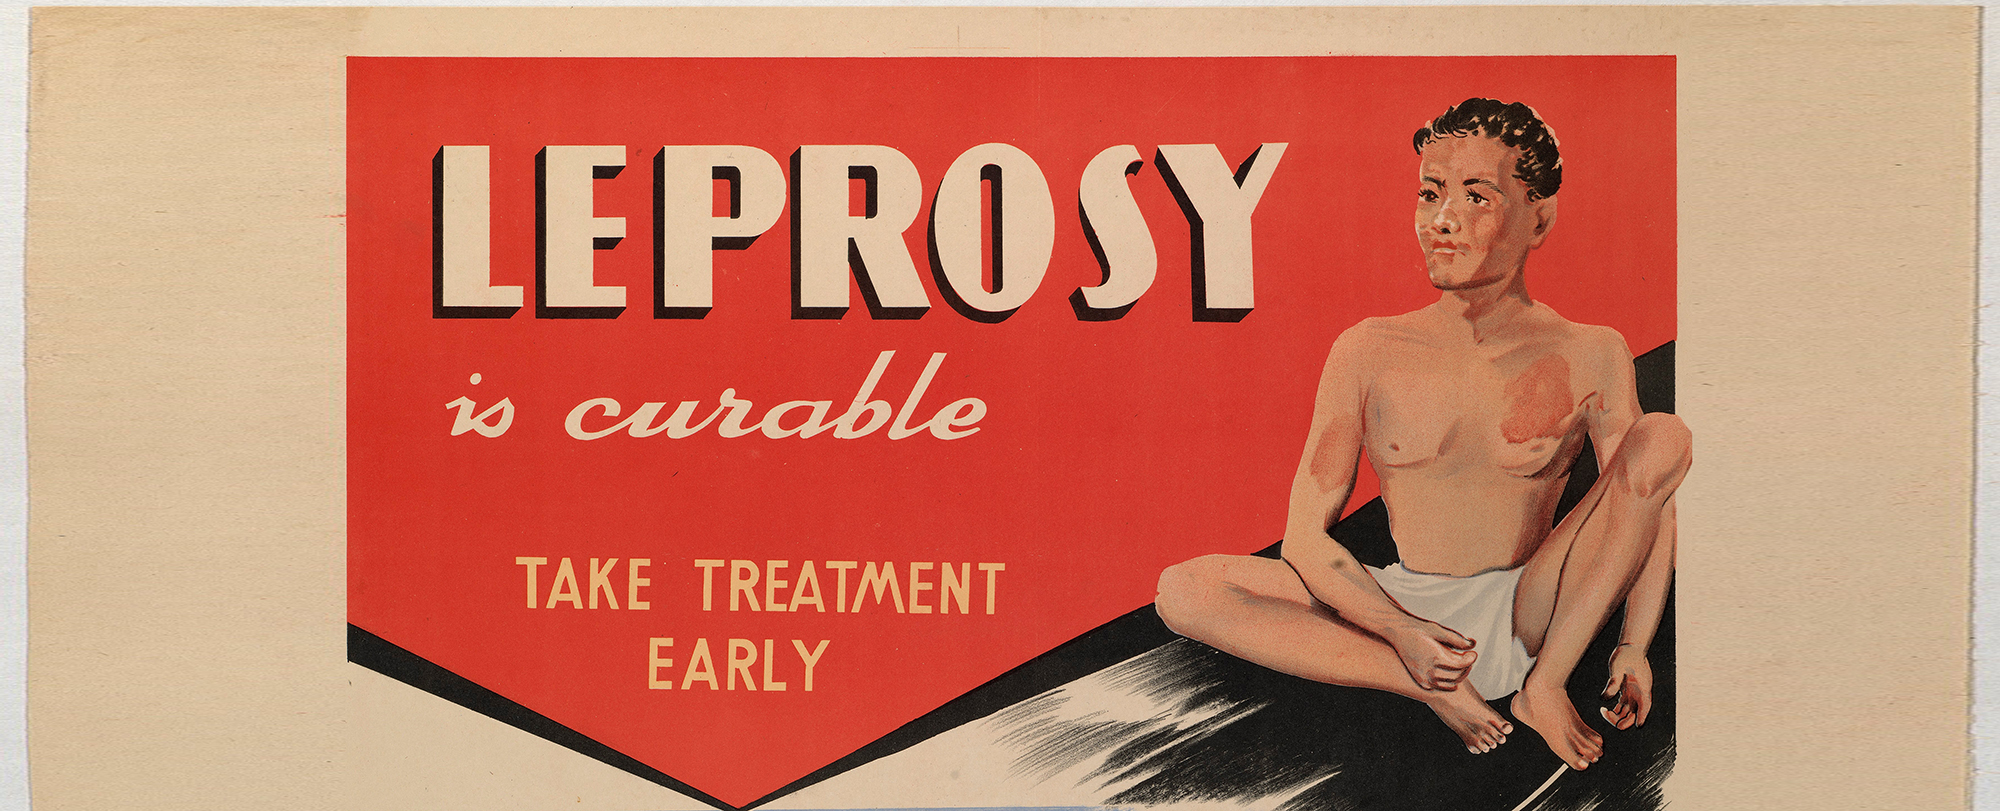 World Leprosy Day. Image courtest of Wellcome Collection.